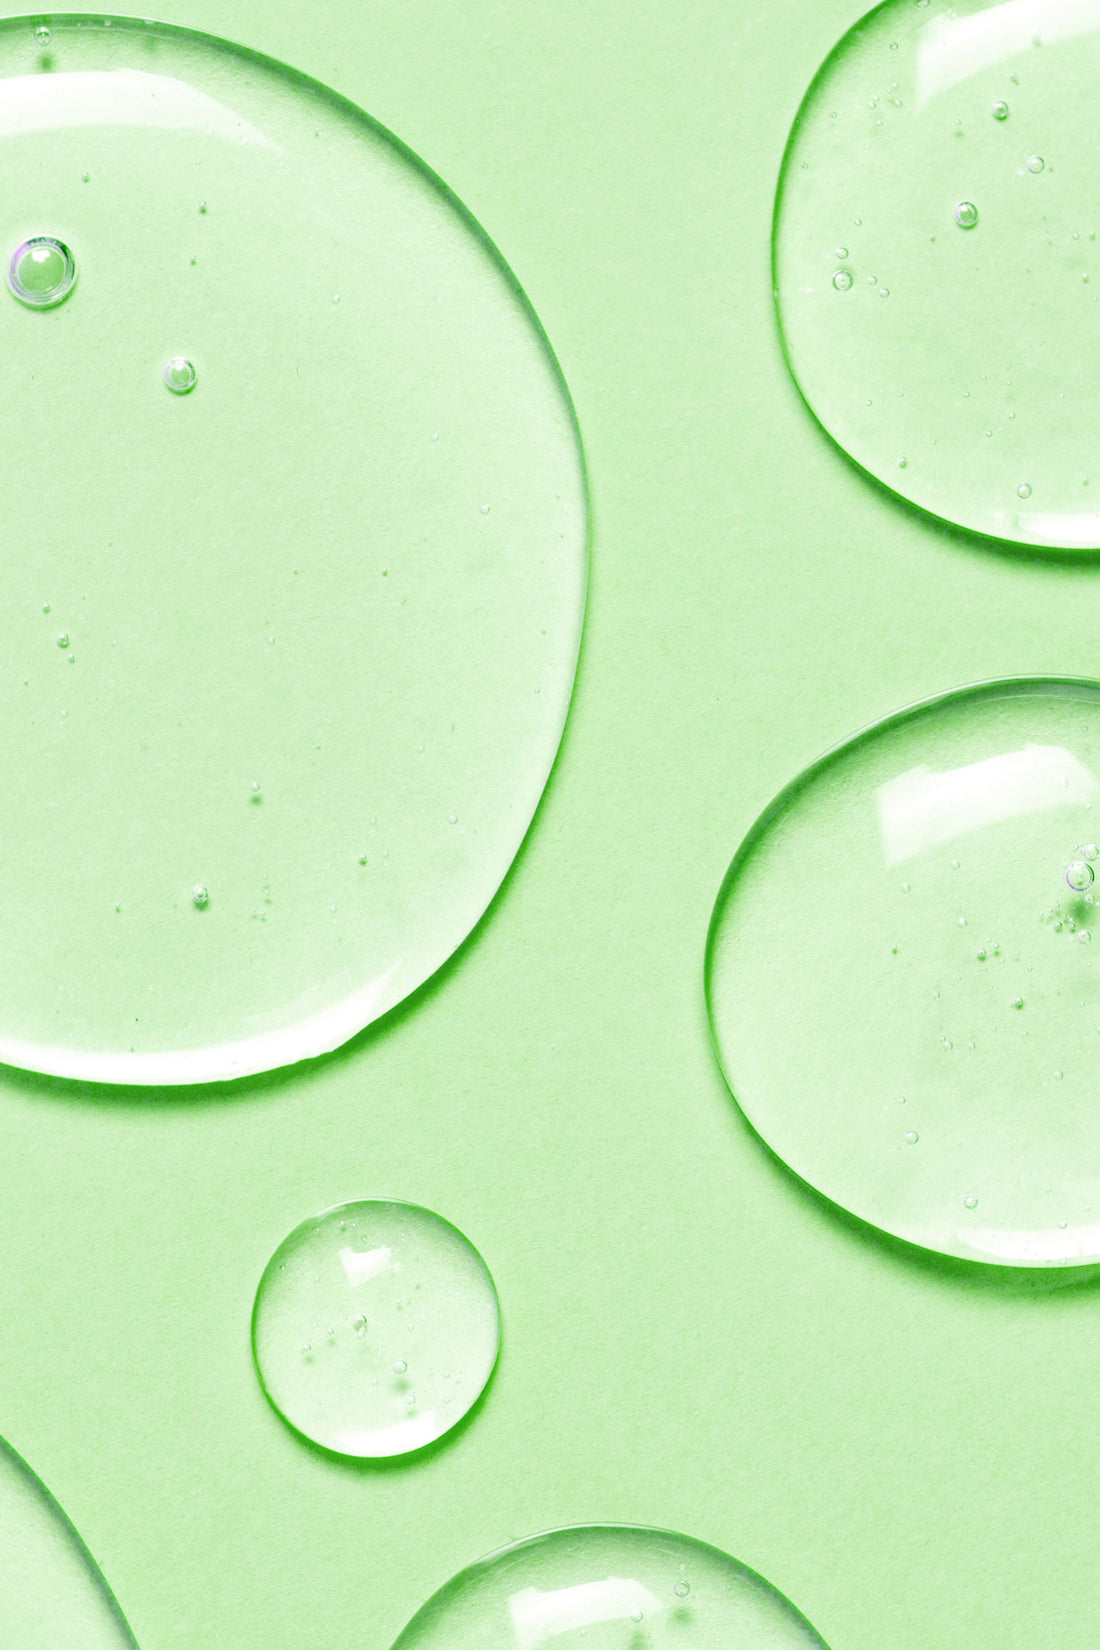 Fresh water drops on a light green background